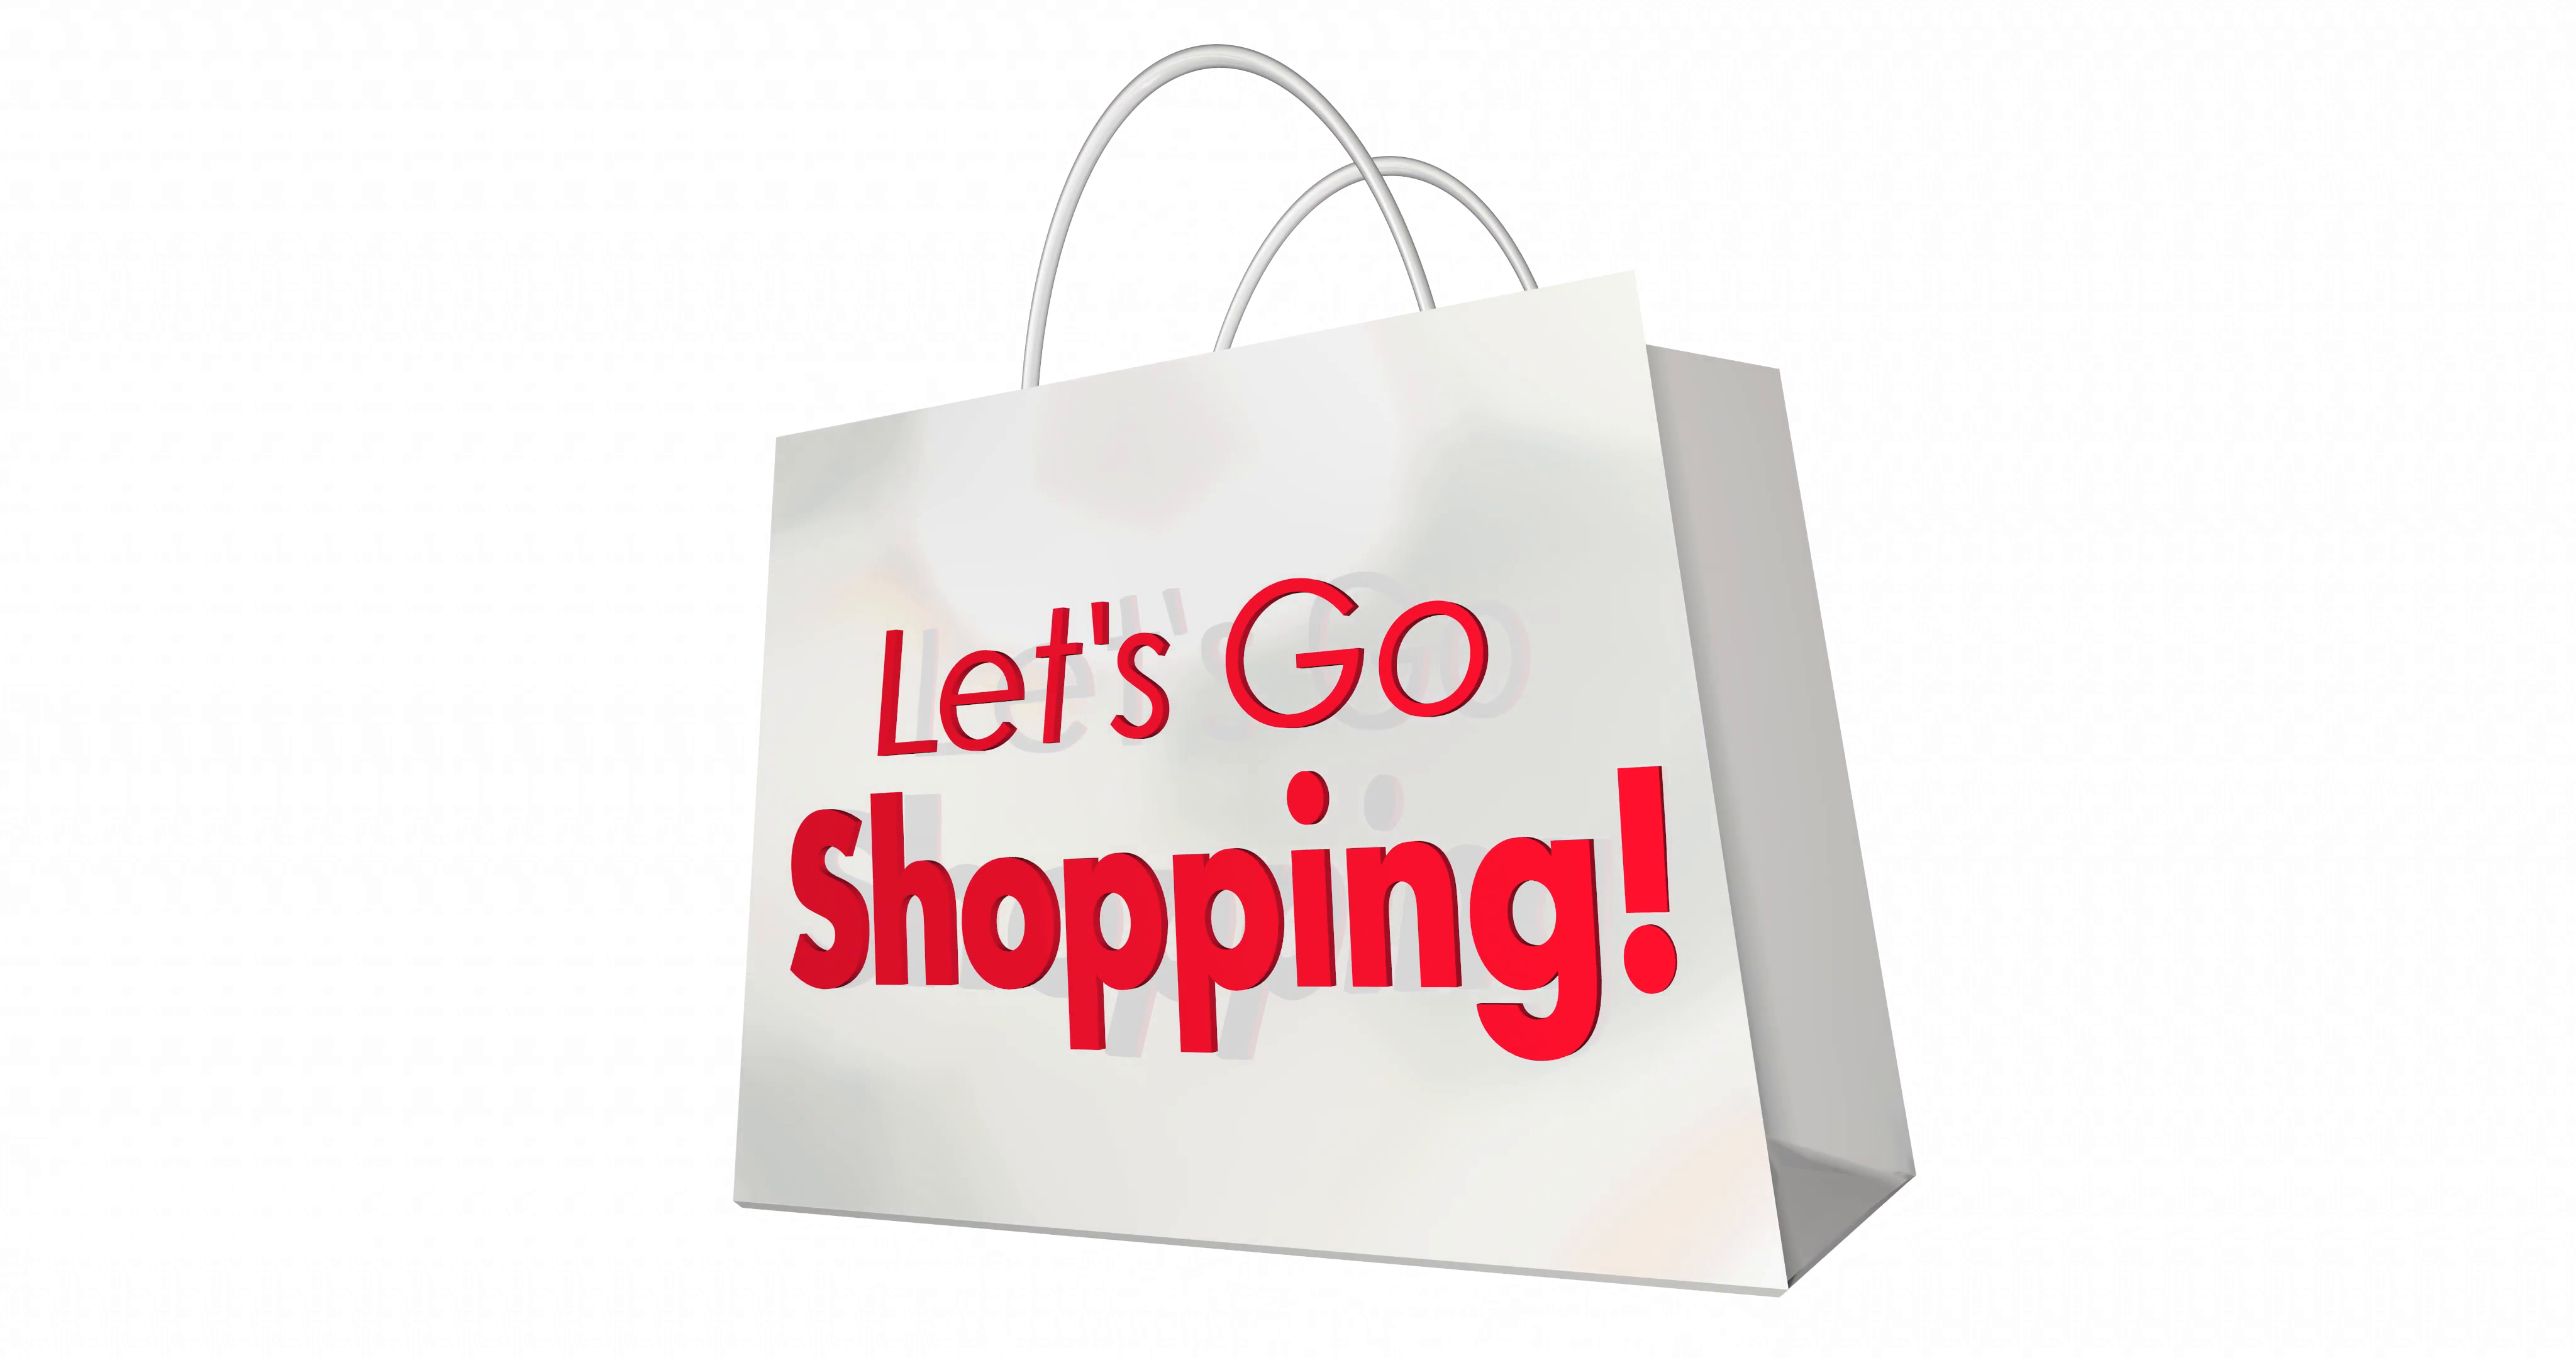 Please go shopping. Lets go shopping. Шоппинг. Go shopping картинка. Let's go shopping 5 класс.